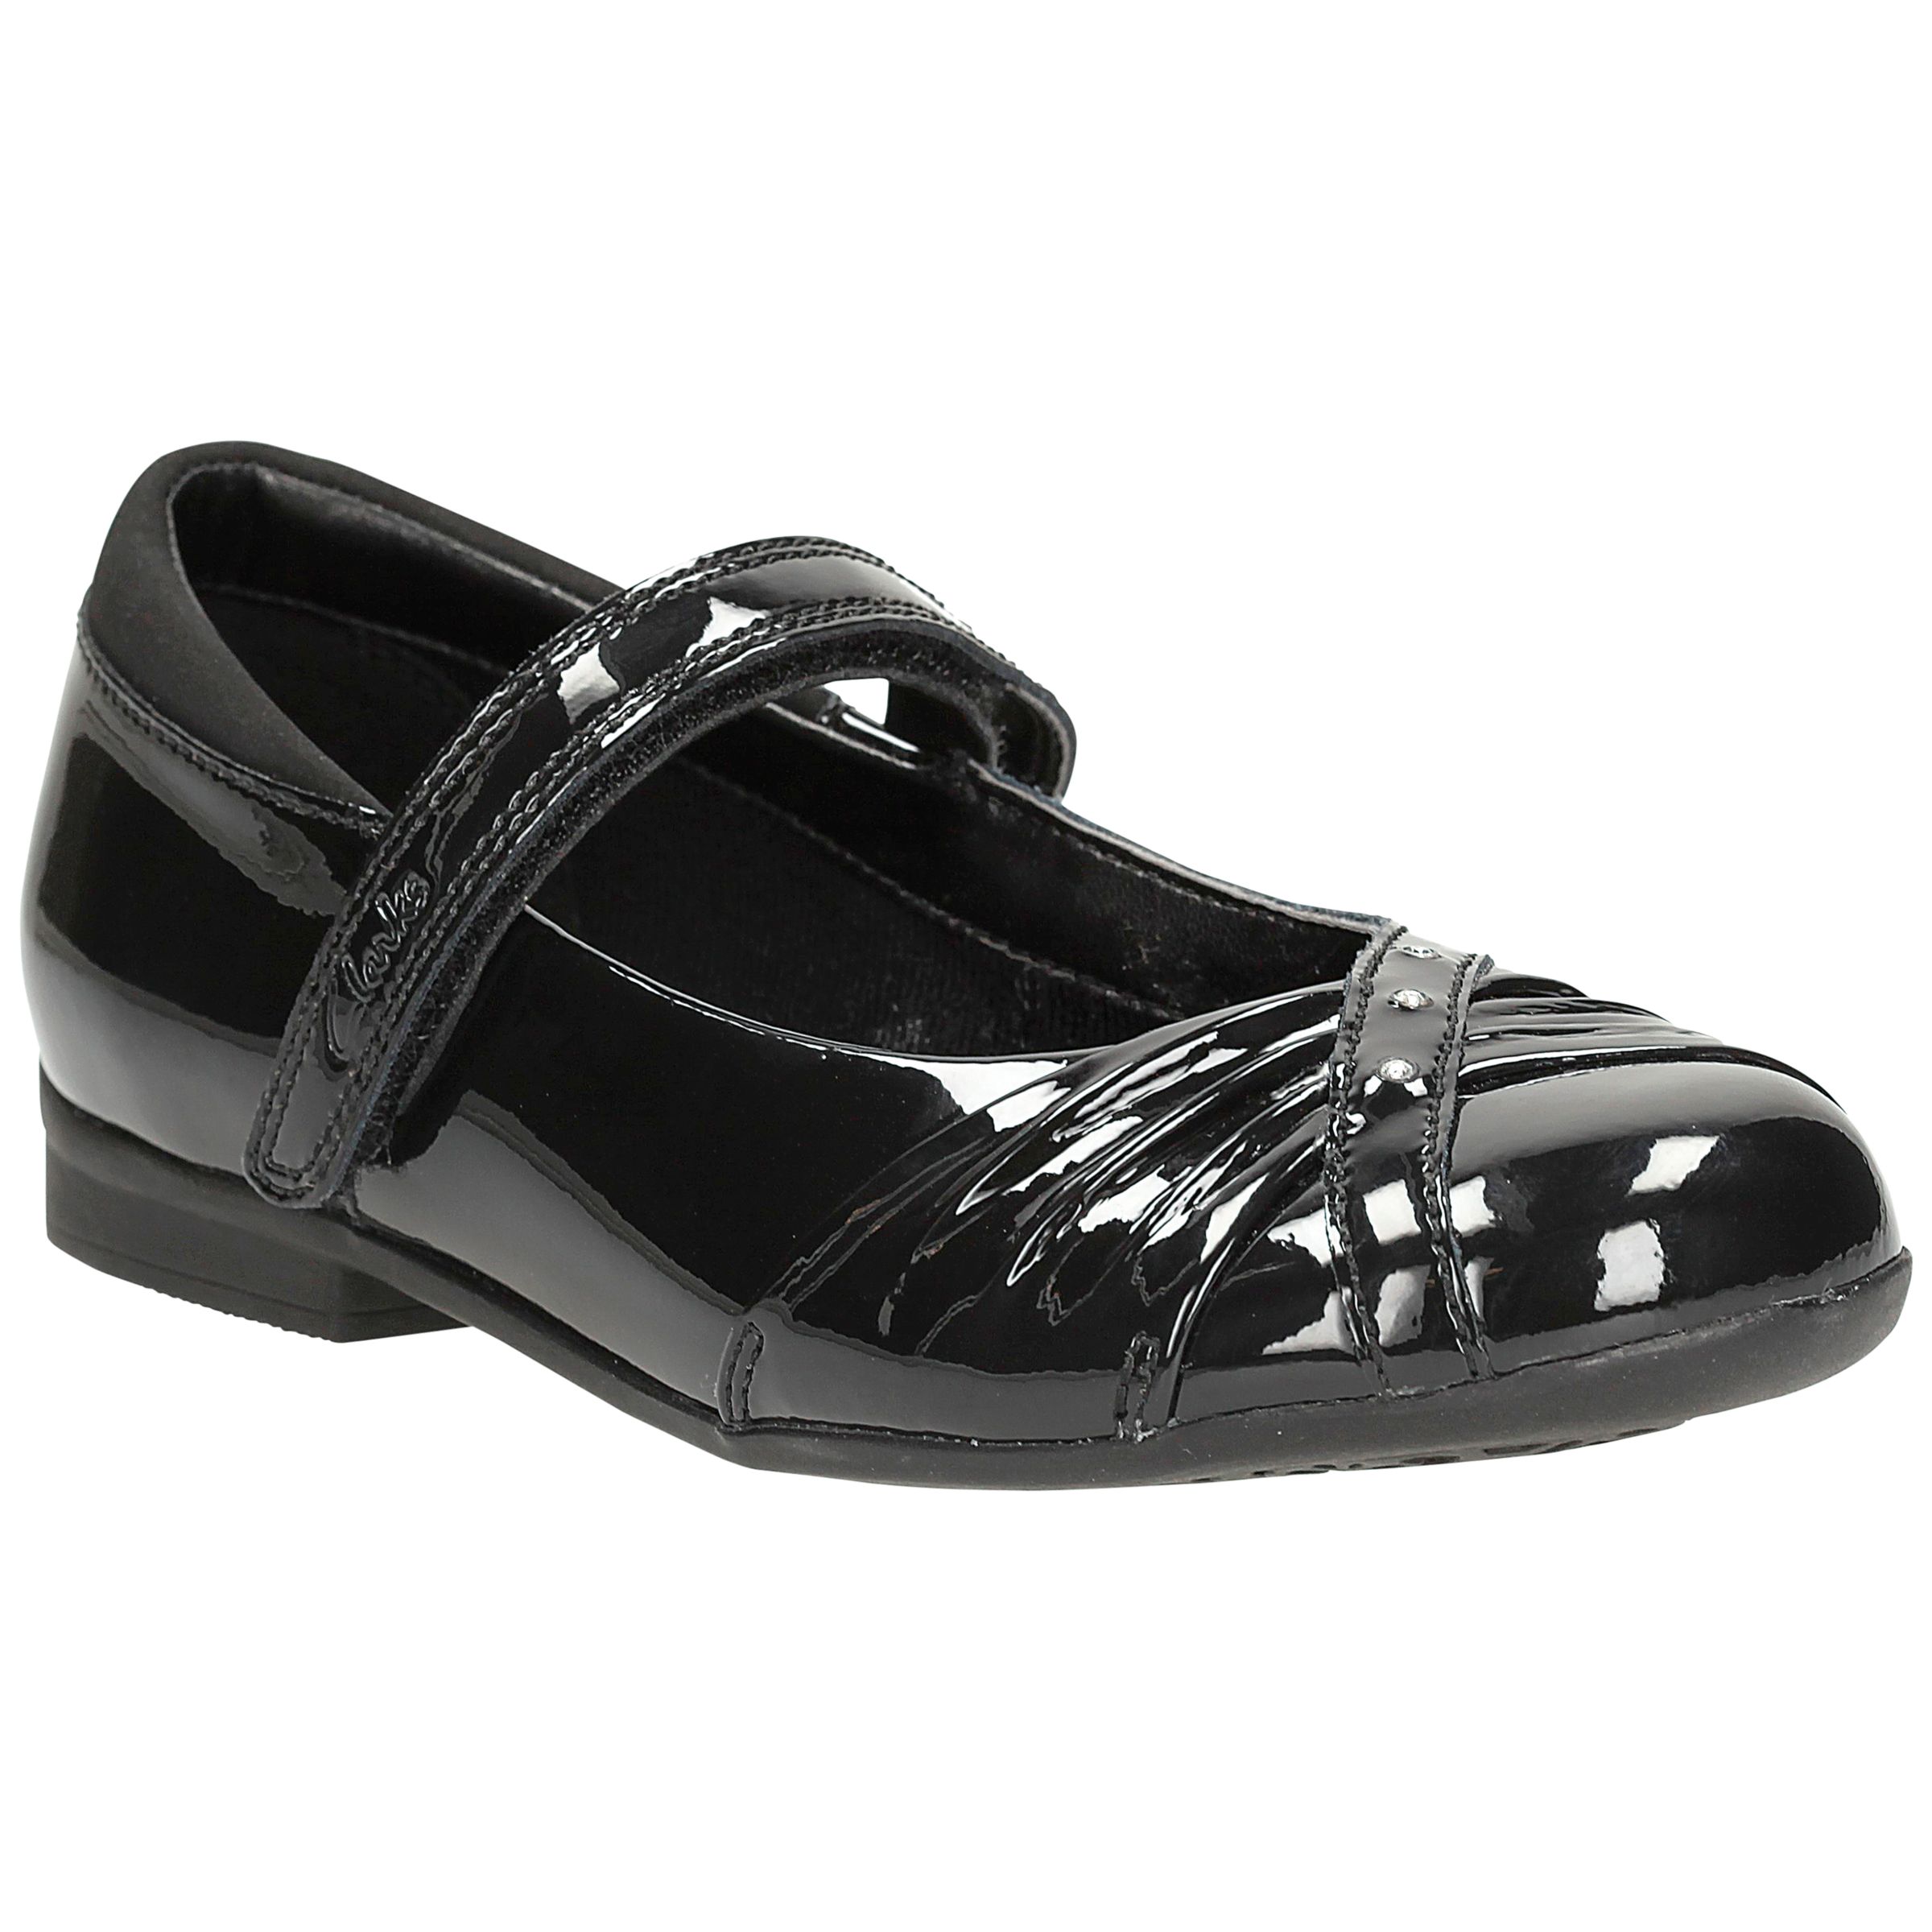 Clarks Children's Dolly Patent Leather Mary Jane Shoes, Black at John ...